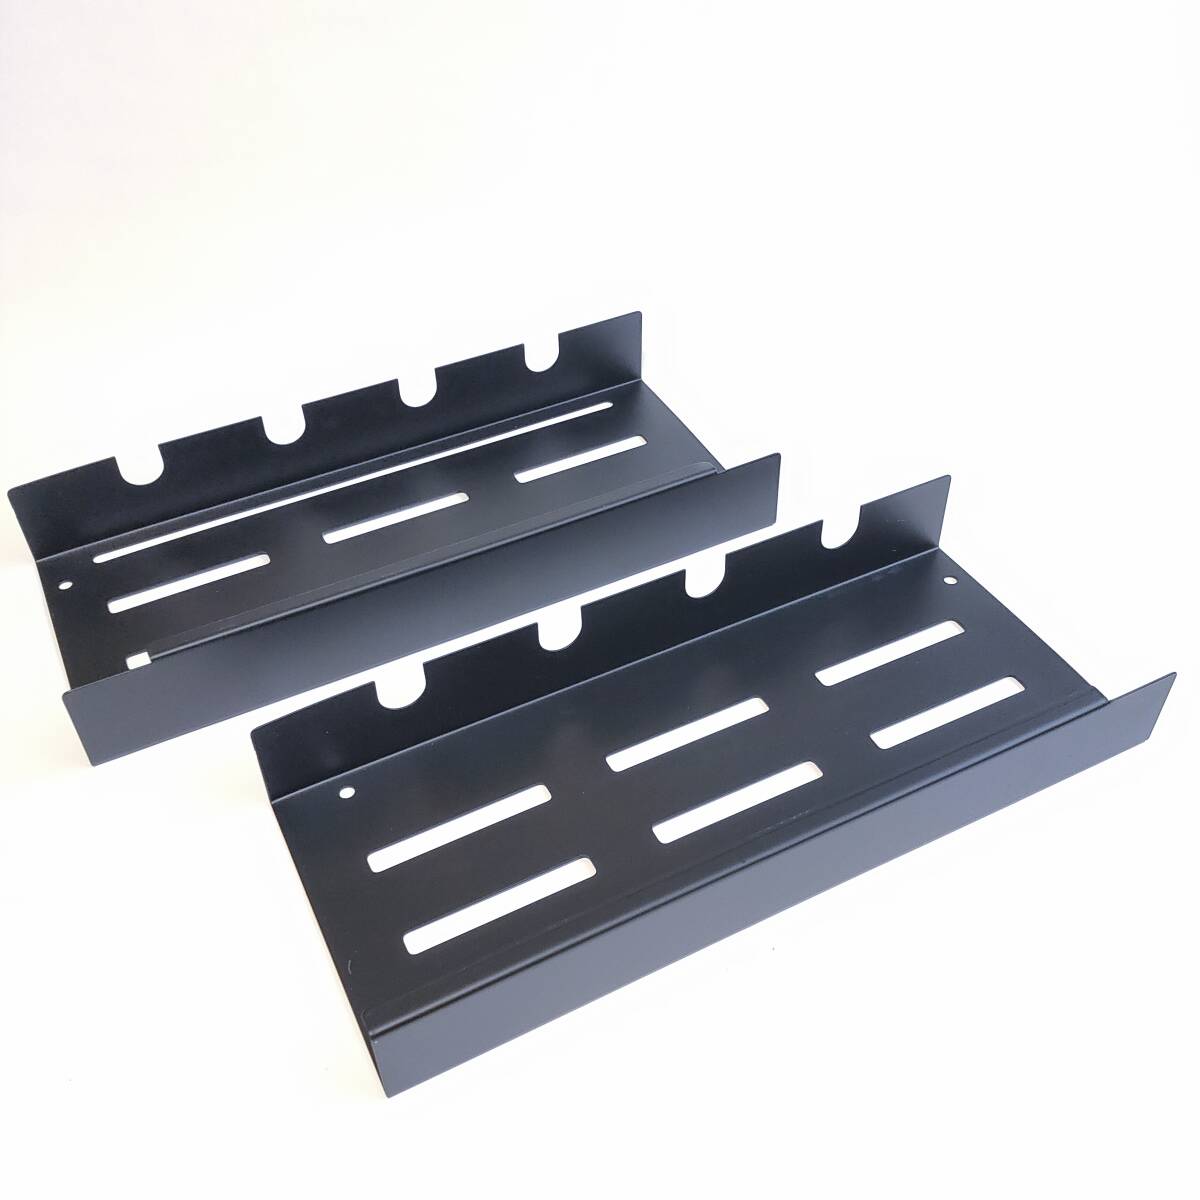 [ one jpy start ]GAWOOW cable tray desk under wiring tray flexible type black [1 jpy ]AKI01_2574